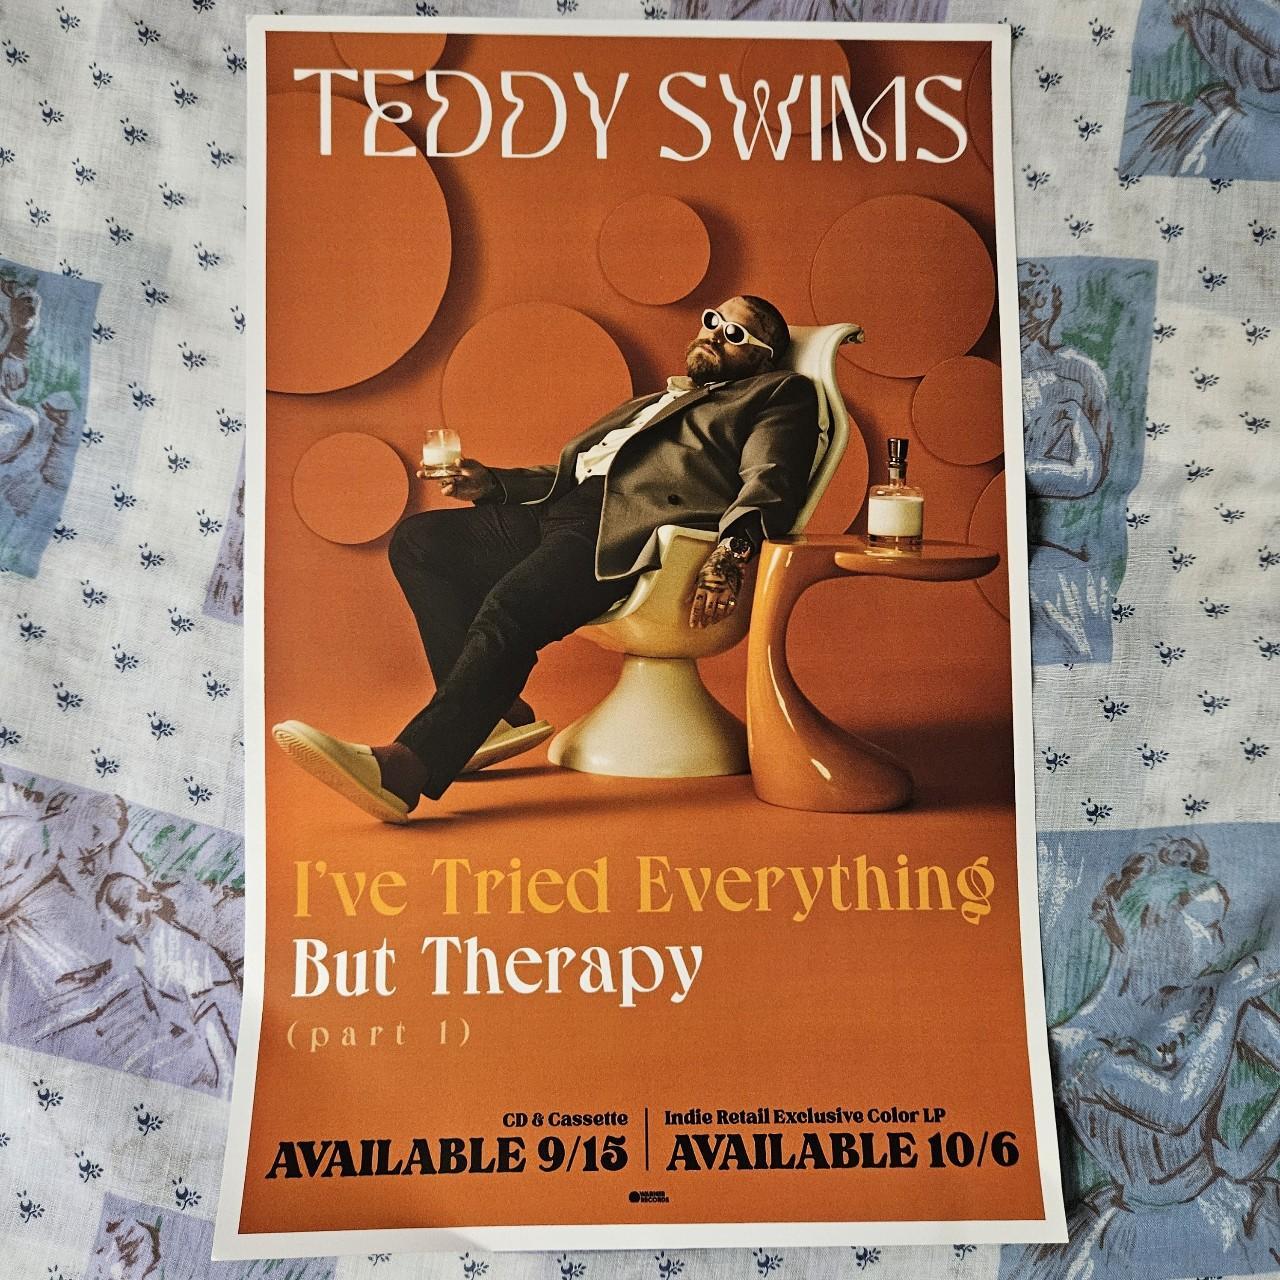 Teddy Swims - I've Tried Everything But Therapy (Part 1) - CD 